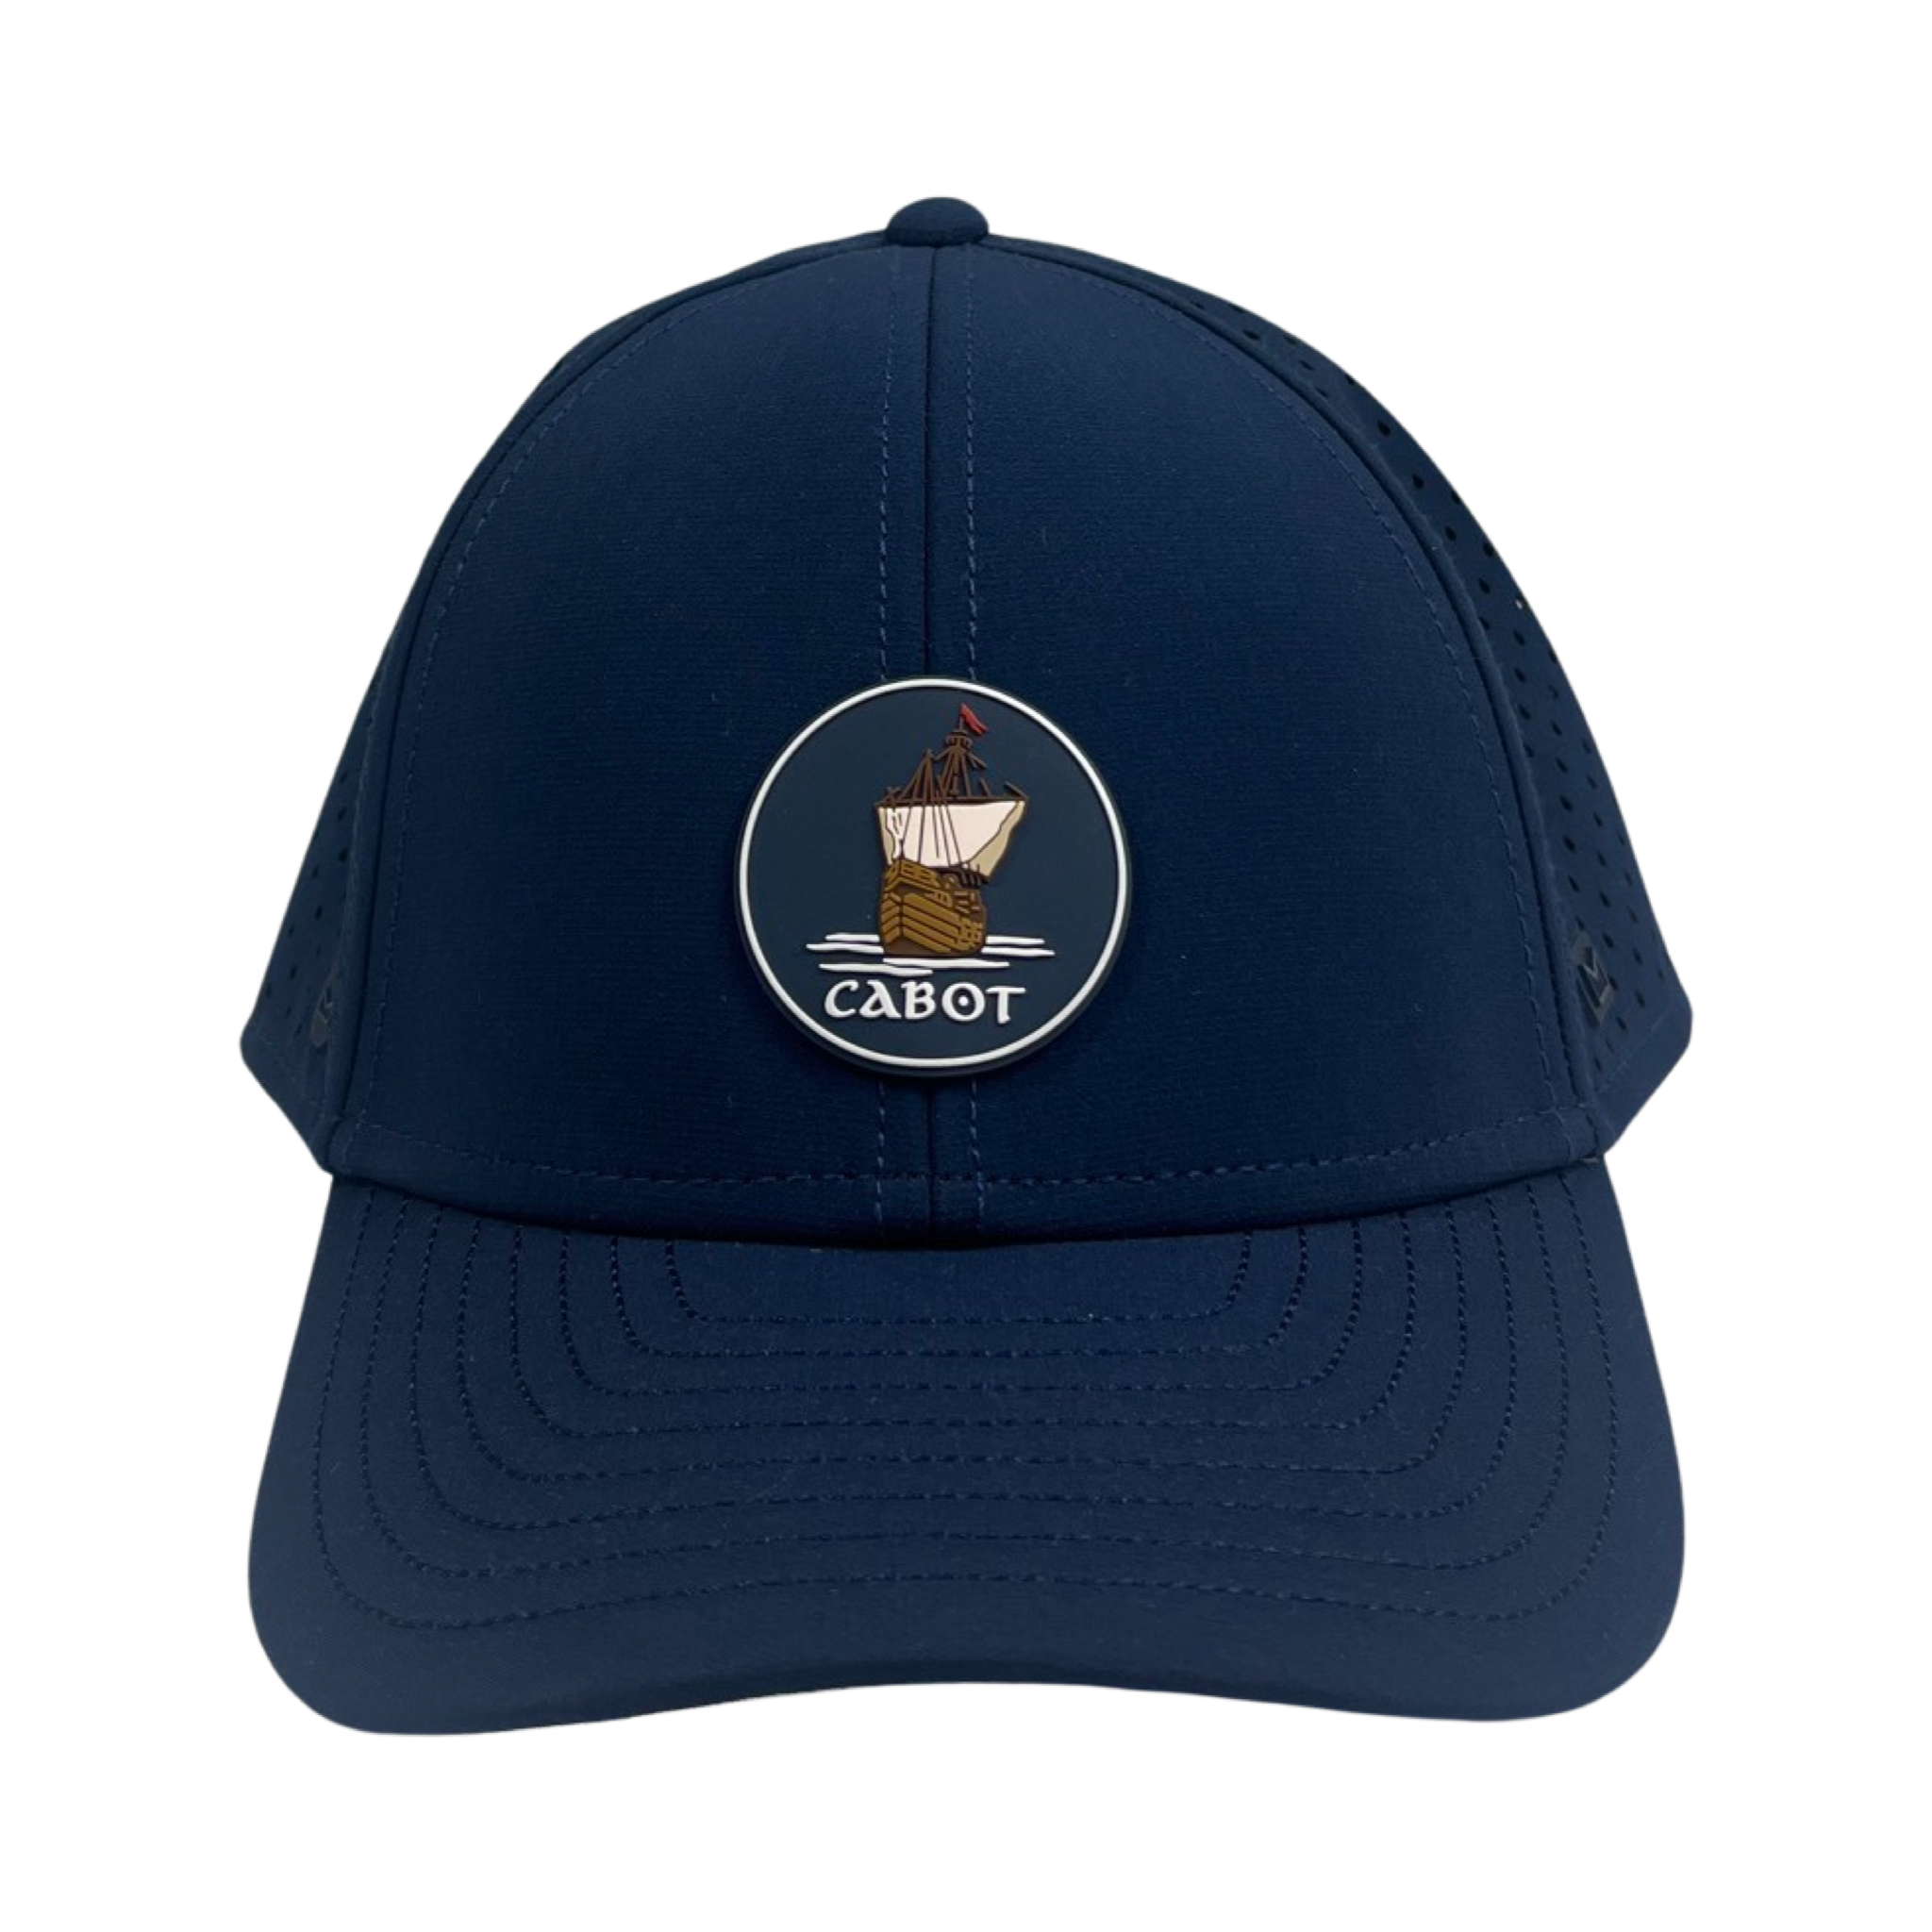 Melin Cabot Links A-Game Hydro Hat